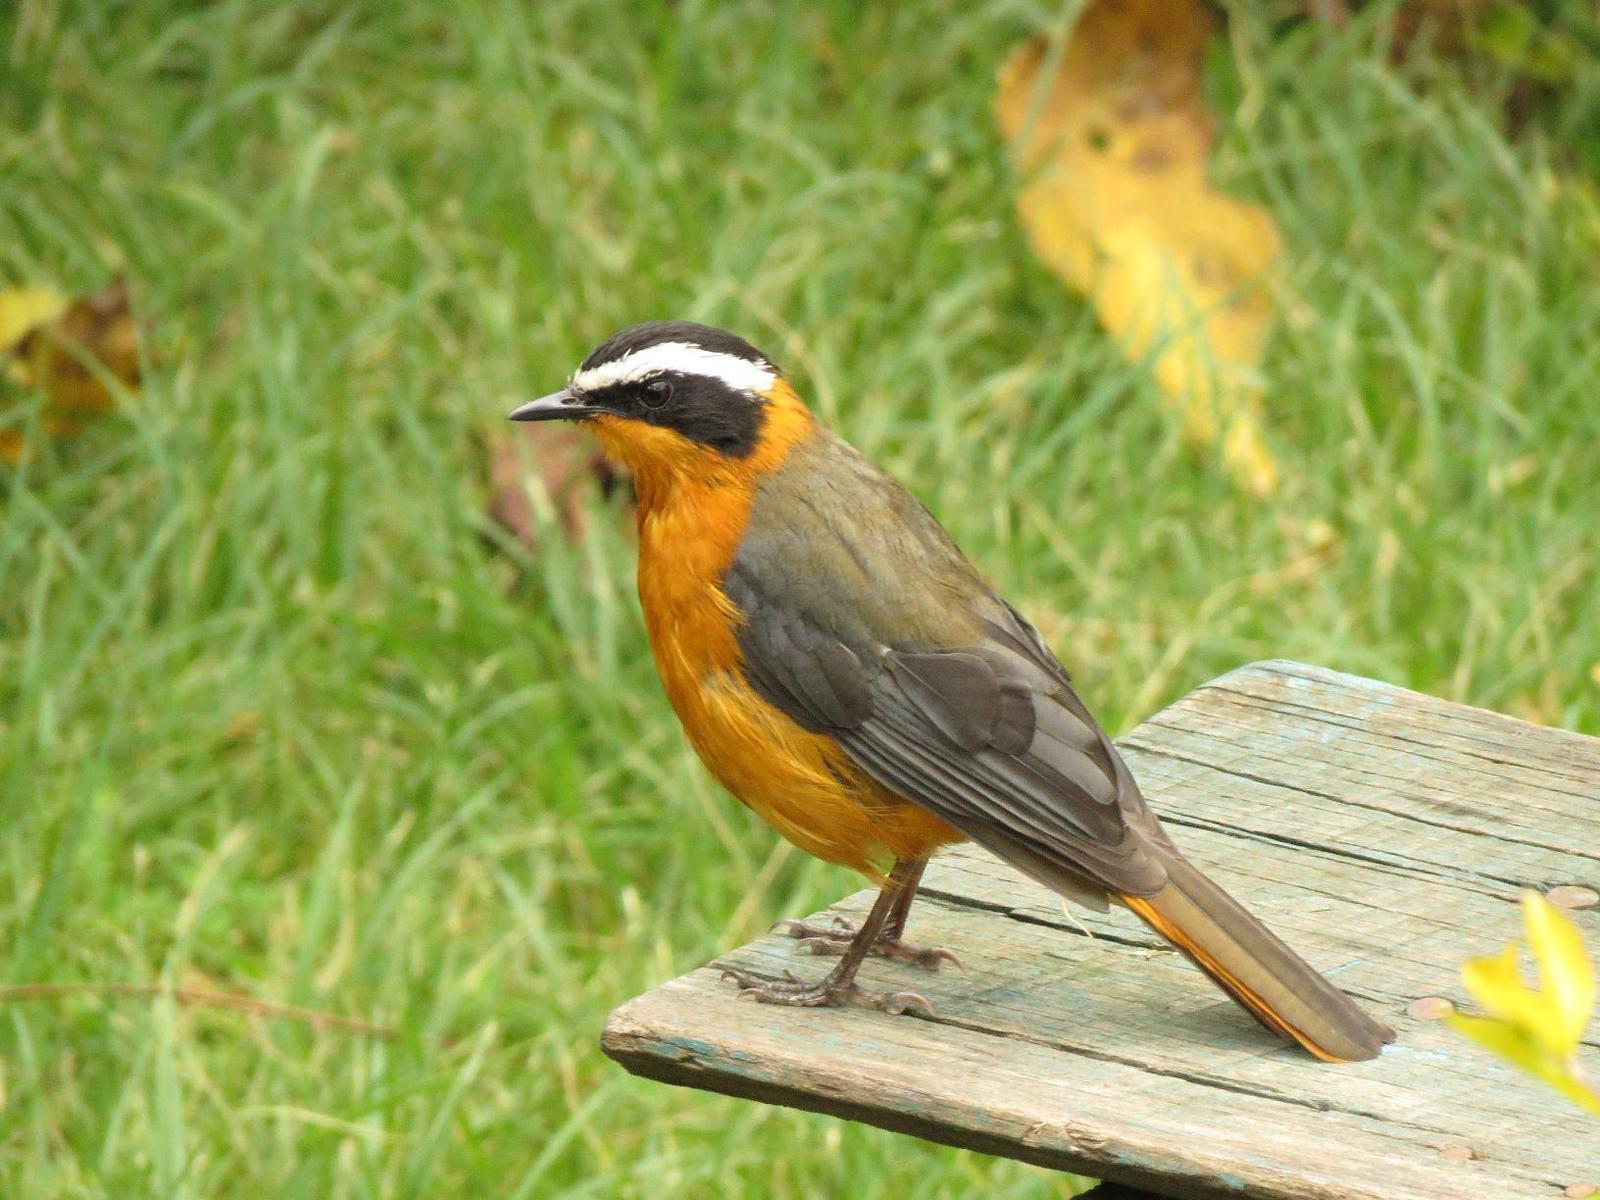 White-browed Robin-Chat Photo by Cyndee Pelt